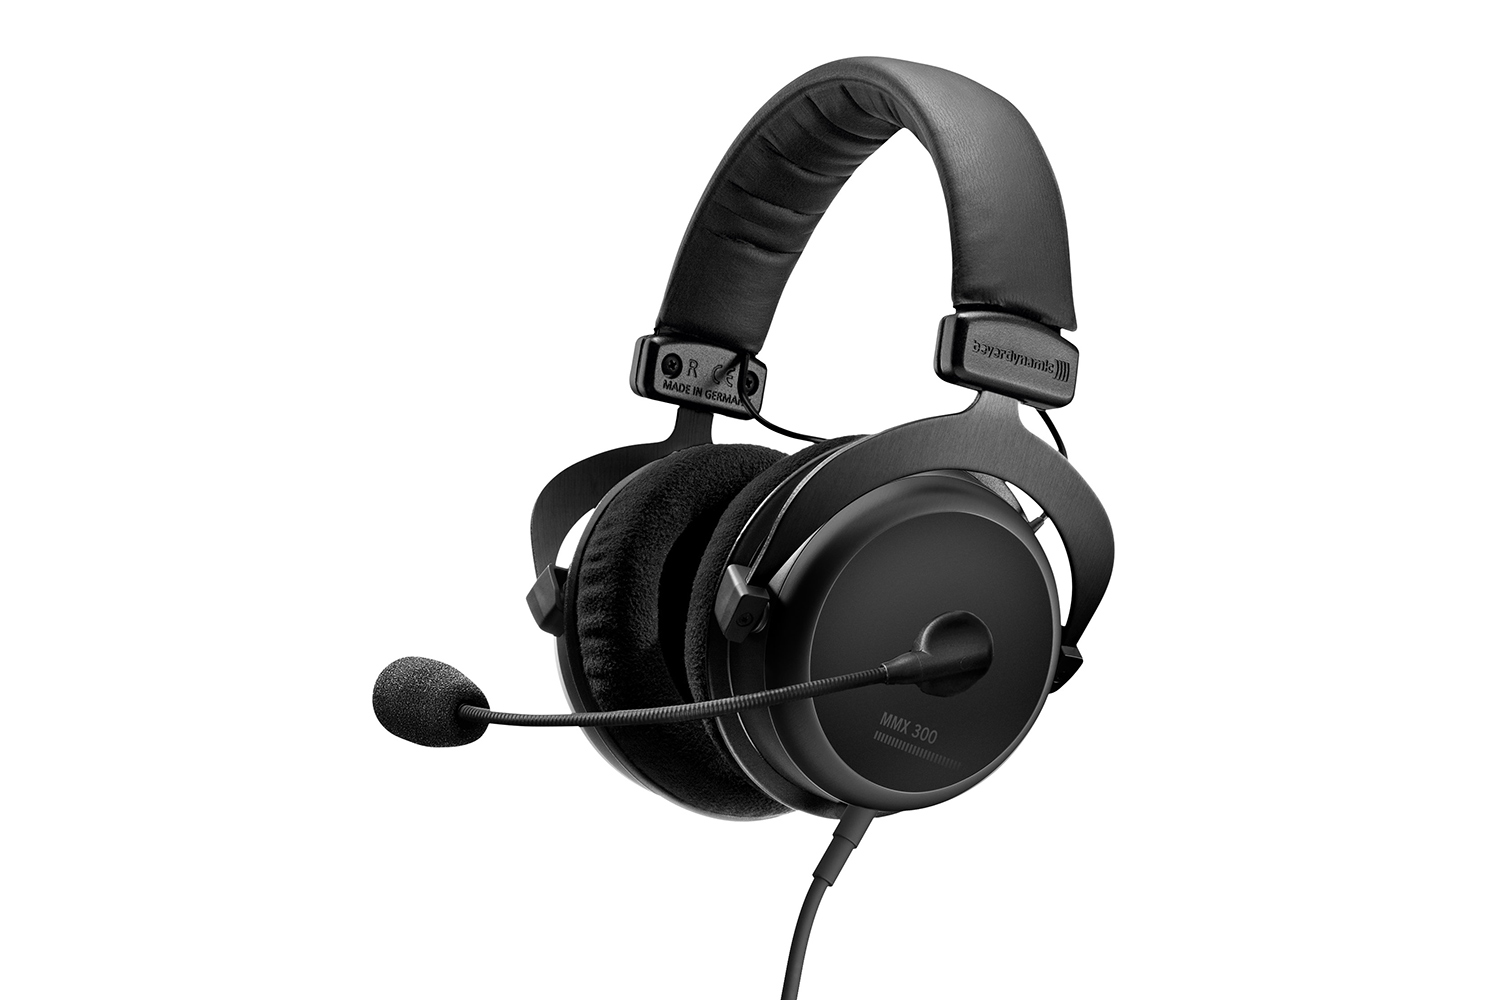 beyerdynamic announces second gen mmx 300 gaming headset ces 2017 pic mmx300 facelift2016 16 11 perspective v1 01